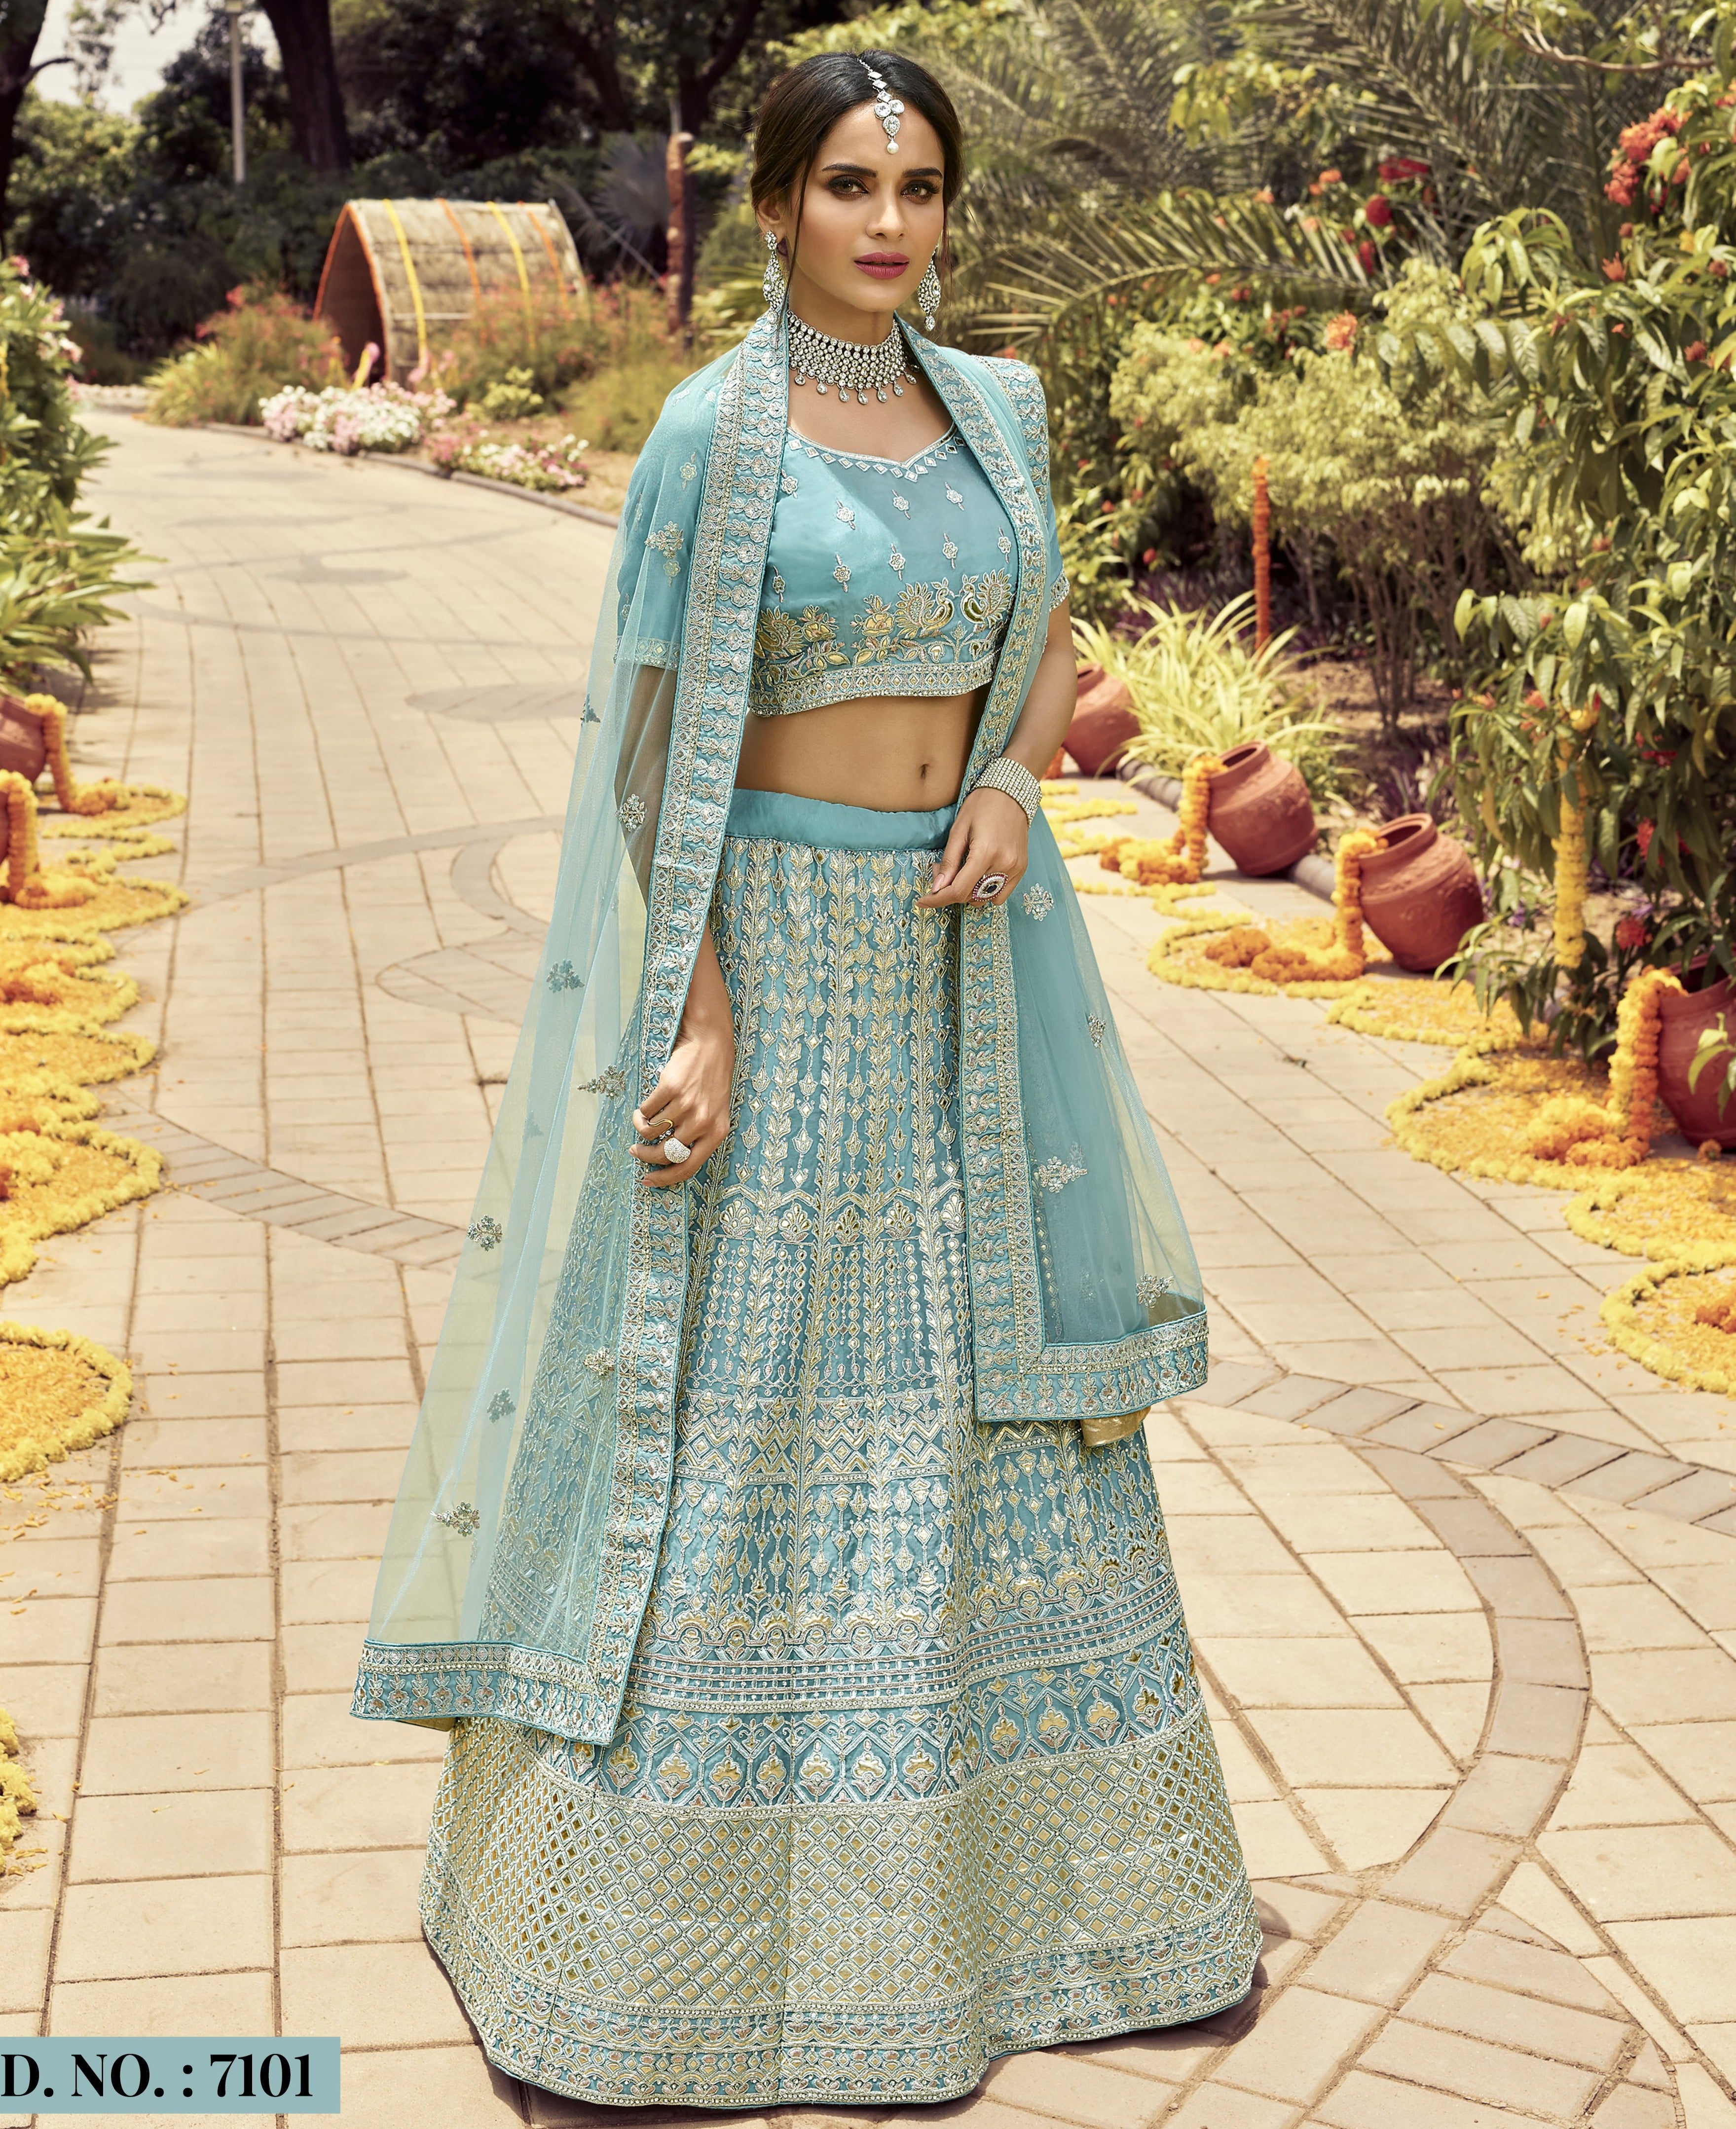 Please help! Discontinued Anita Dongre lehenga design. How to find second- hand one or a good dupe? No luck so far, been searching for months... :  r/HelpMeFind